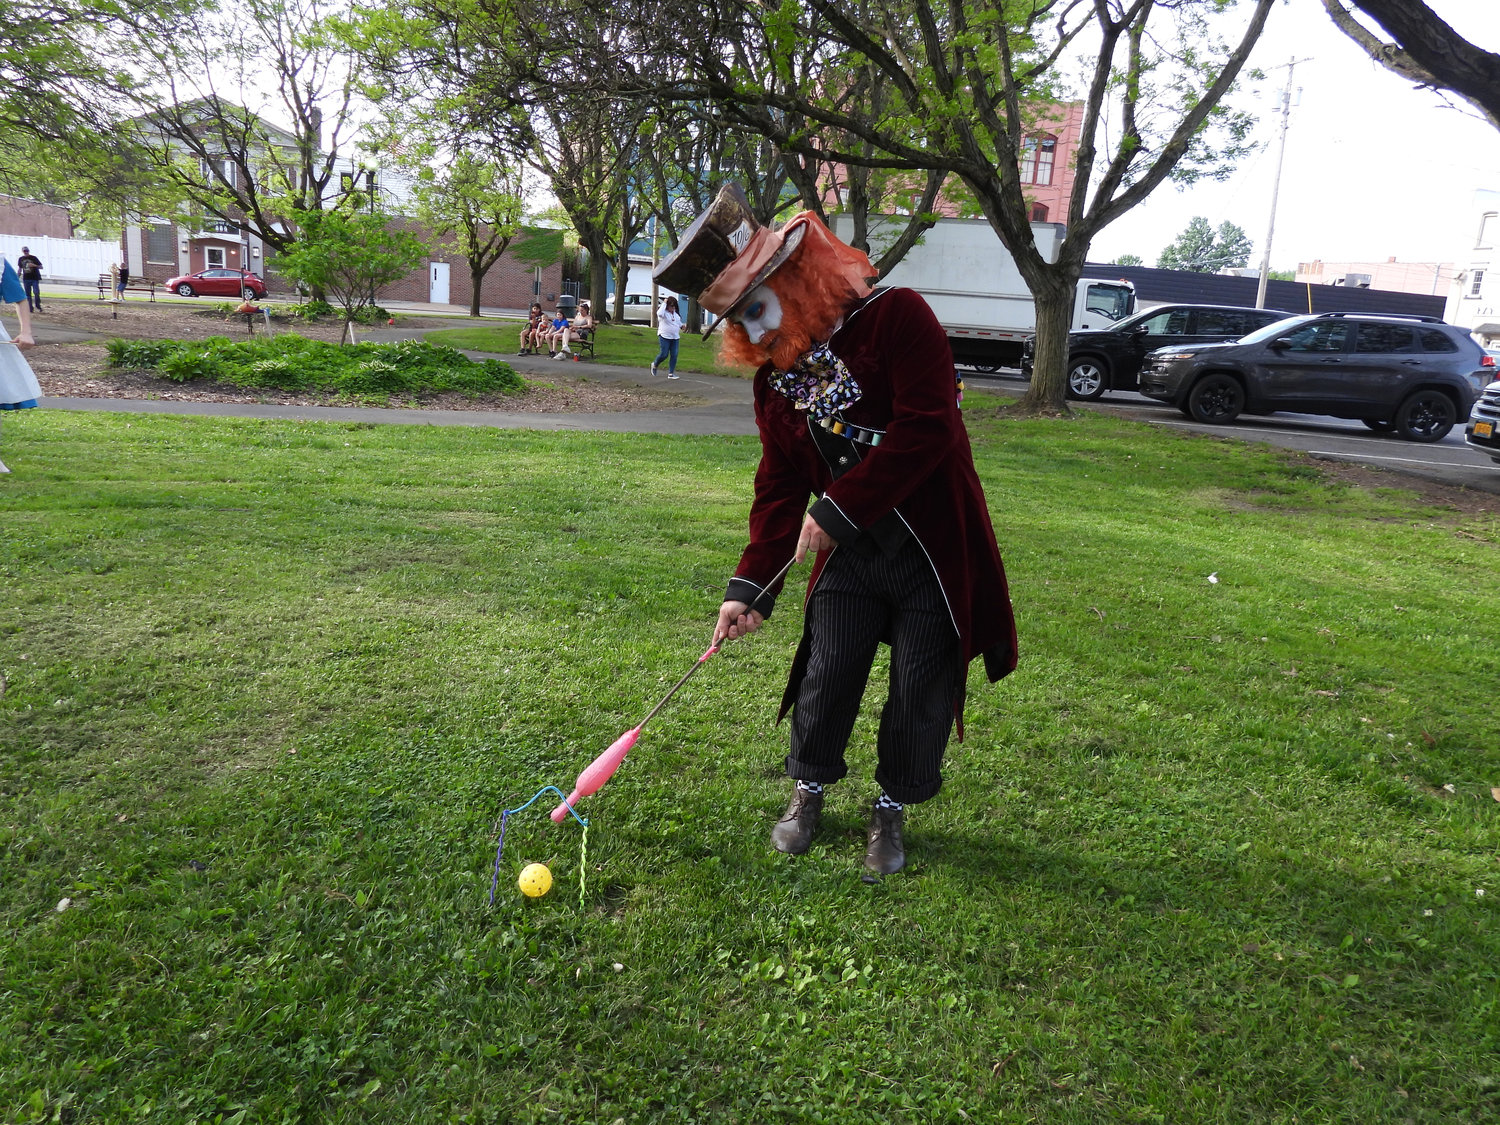 The Mad Hatter takes a swing at flamingo croquet, recreating a scene from "Alice in Wonderland" as part of the Oneida Parks and Recreation Department's "Through the Looking Glass" event, with members of the Bogardus Performing Art Center take the role of beloved characters.